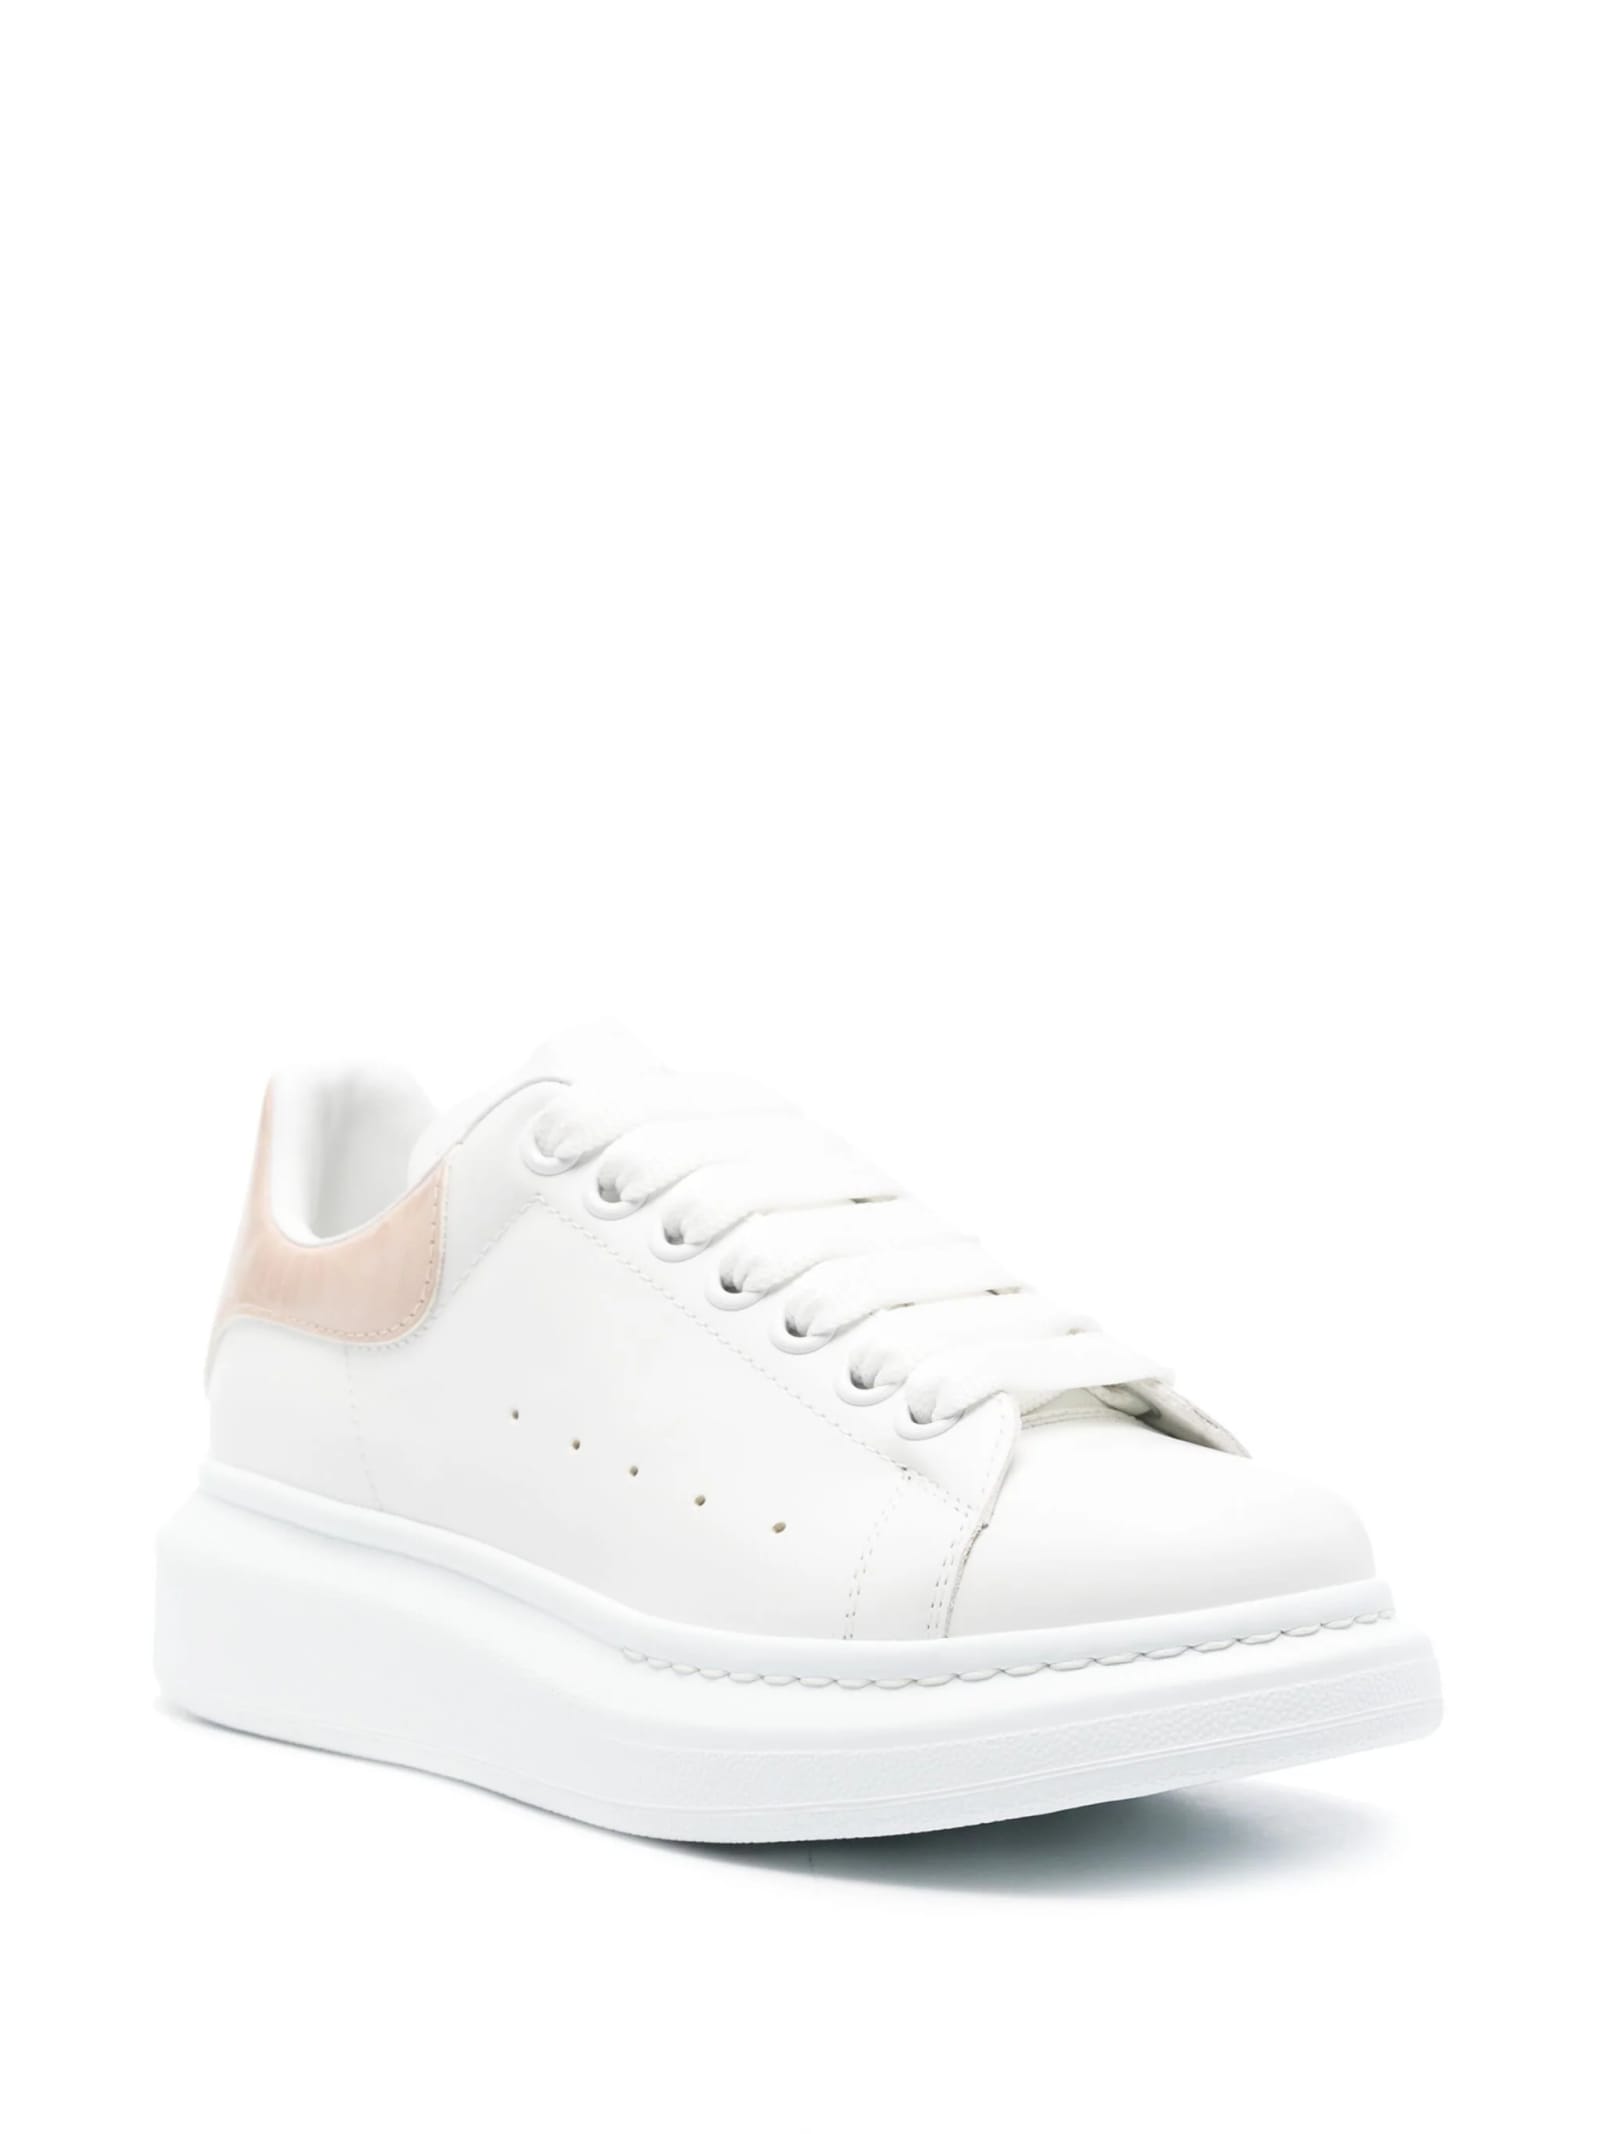 Shop Alexander Mcqueen White Oversized Sneakers With Powder Beige Shiny Spoiler